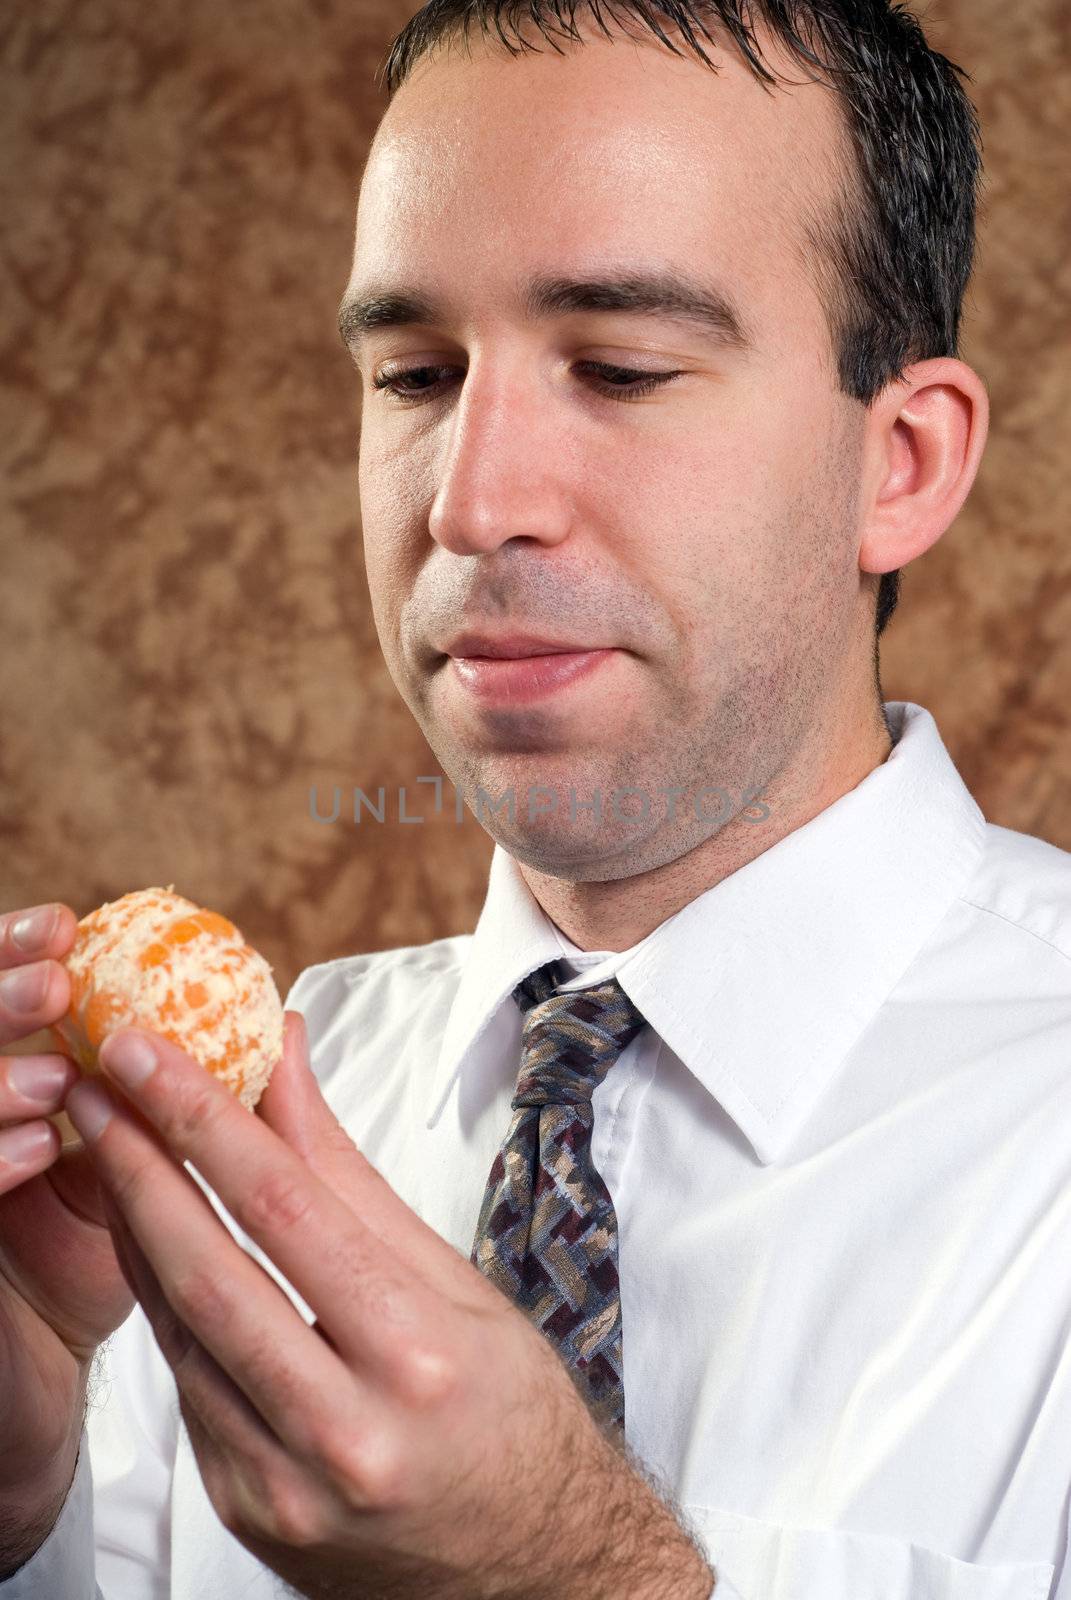 A young businessman wearing a white shirt and tie is holding a peeled orange